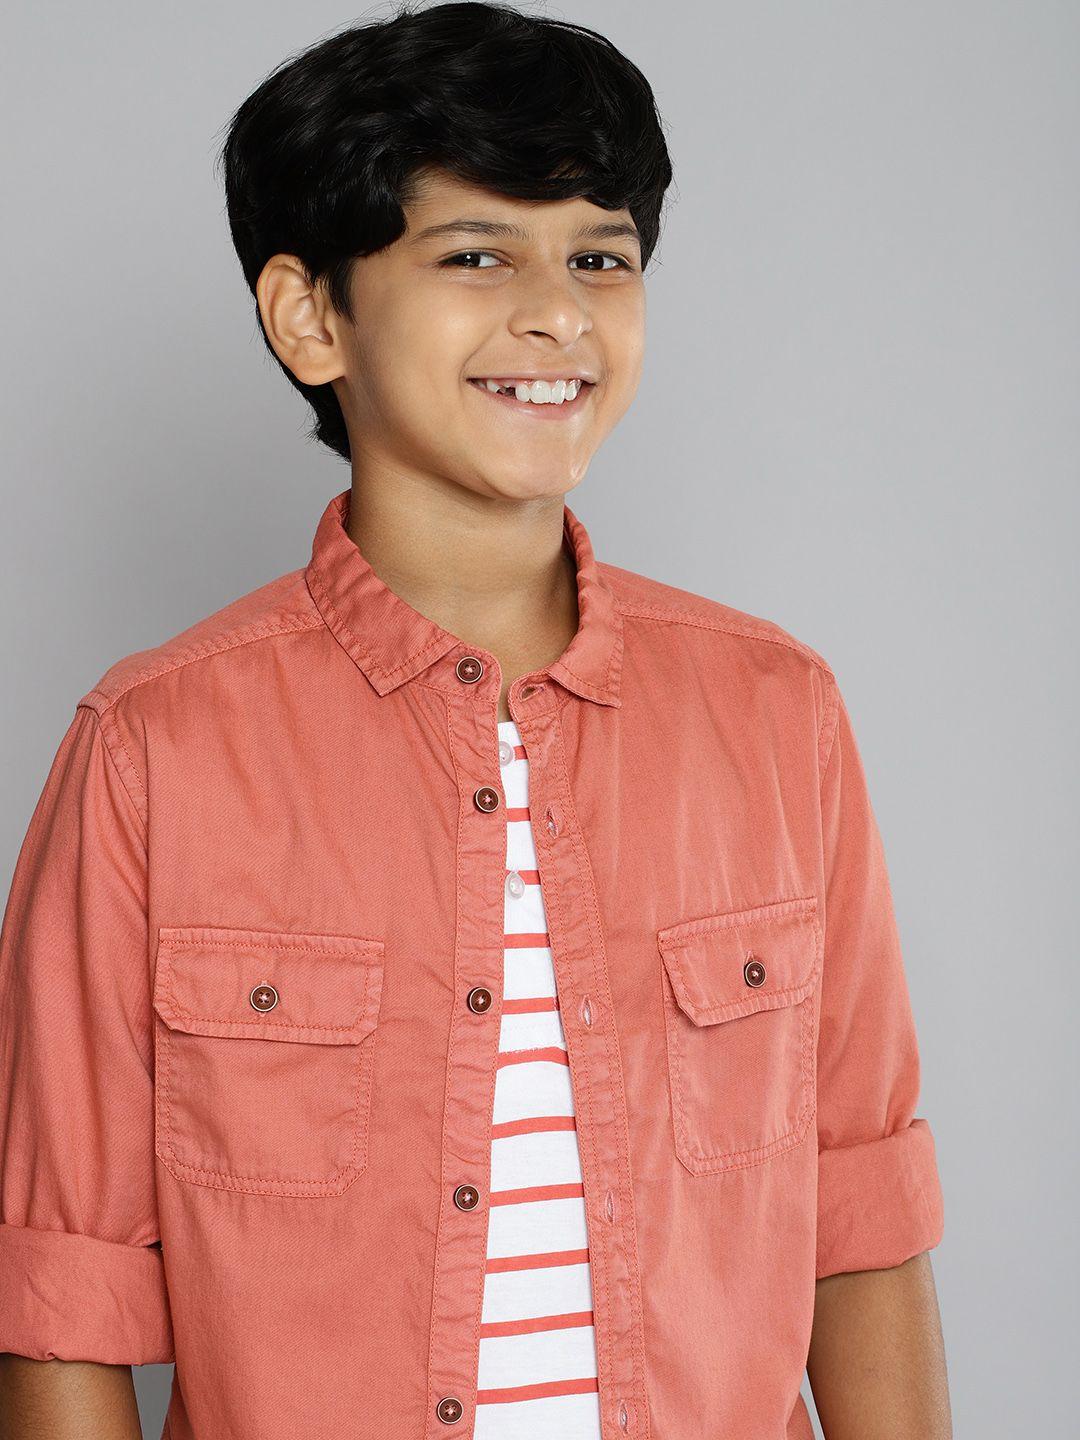 m&h juniors boys coral pink slim fit pure cotton casual shirt